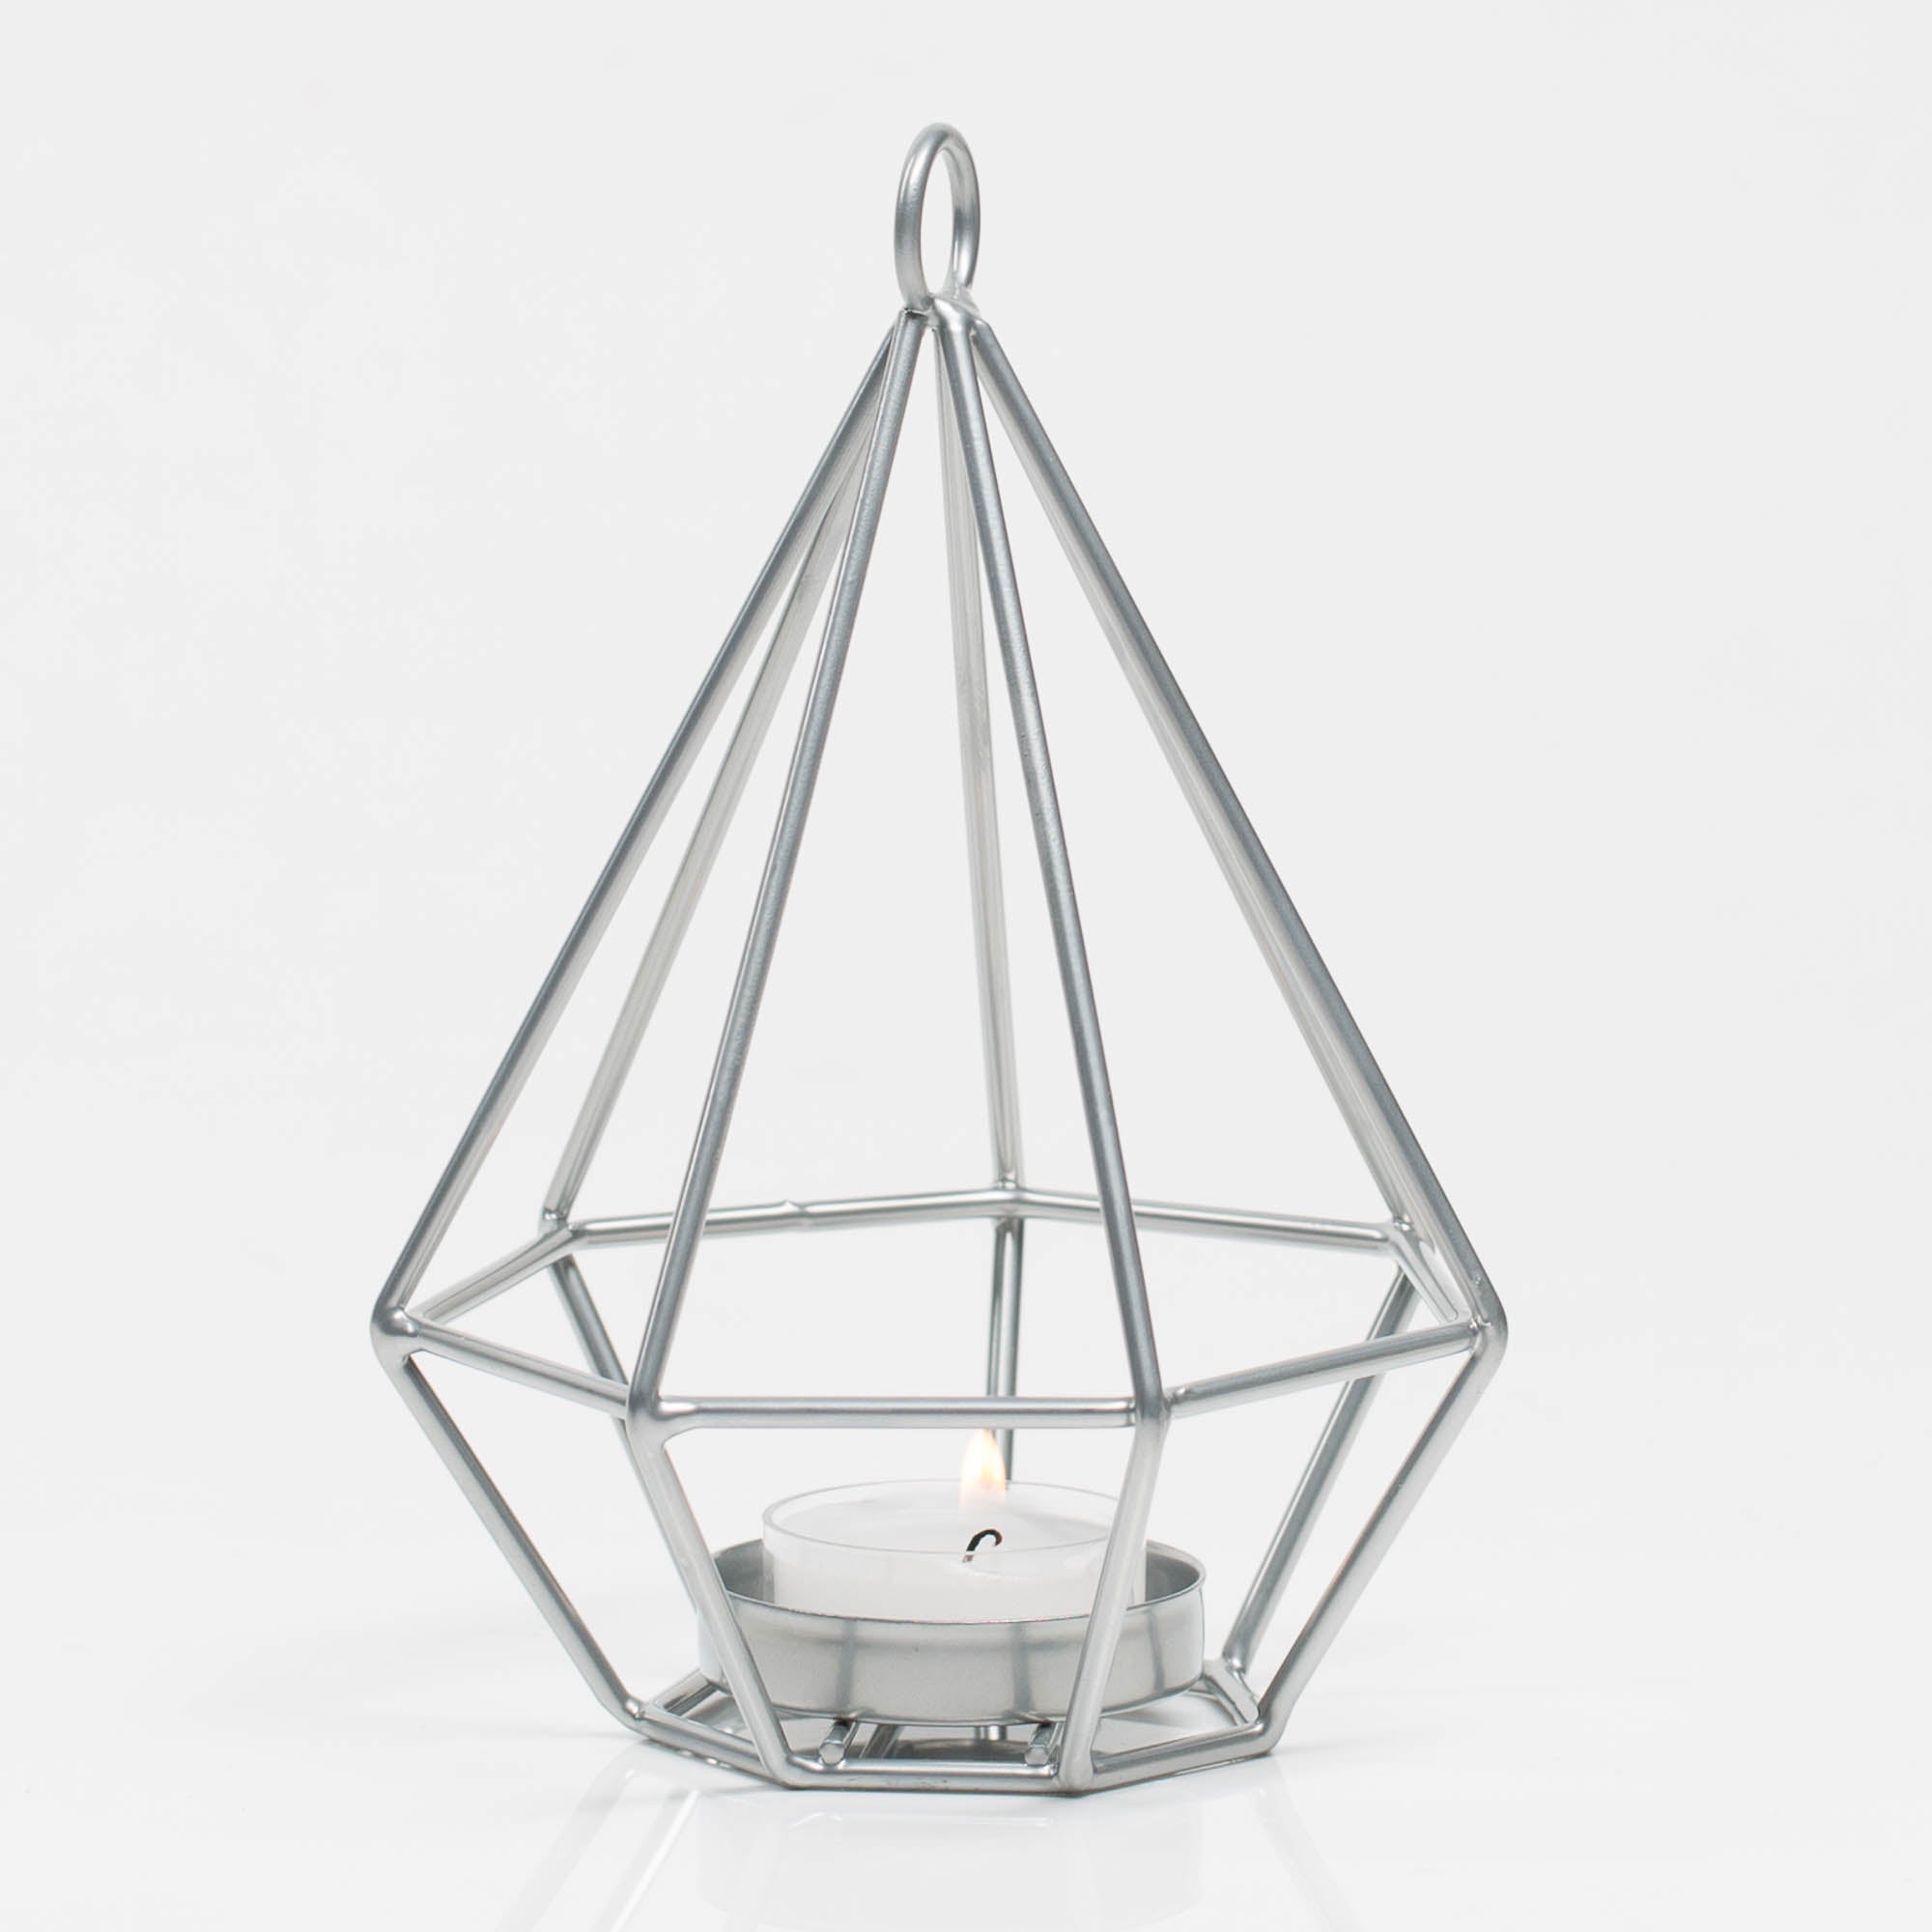 Richland Geometric Tealight Candle Holders - Silver Set of 12